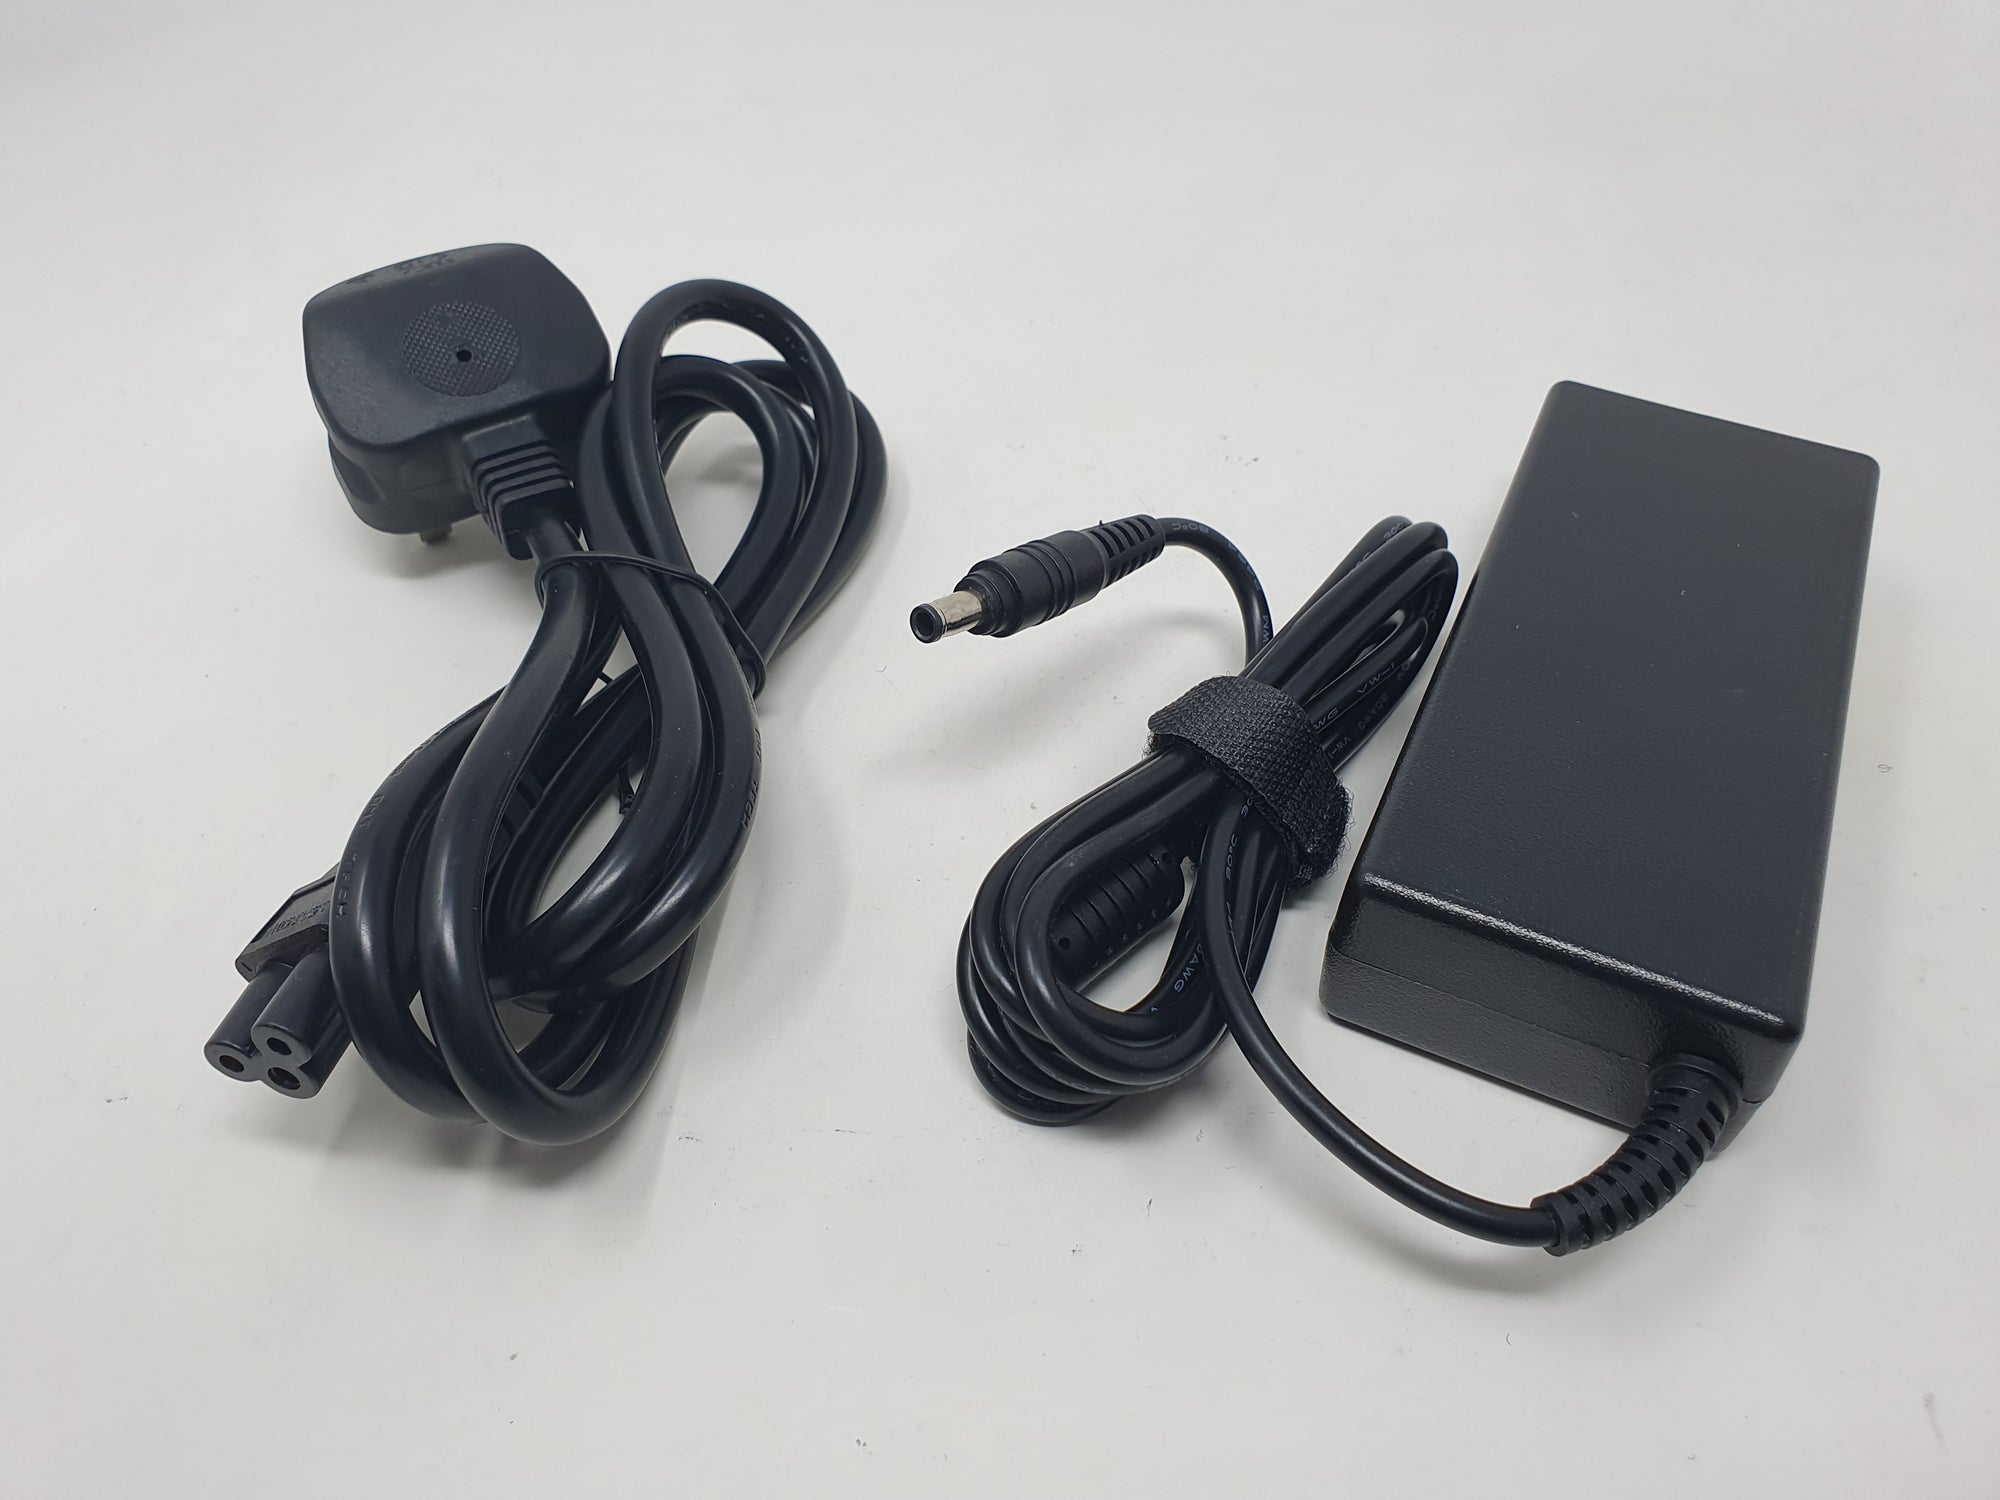 SAMSUNG Laptop Charger Power Supply Adapter 19V 4.7A